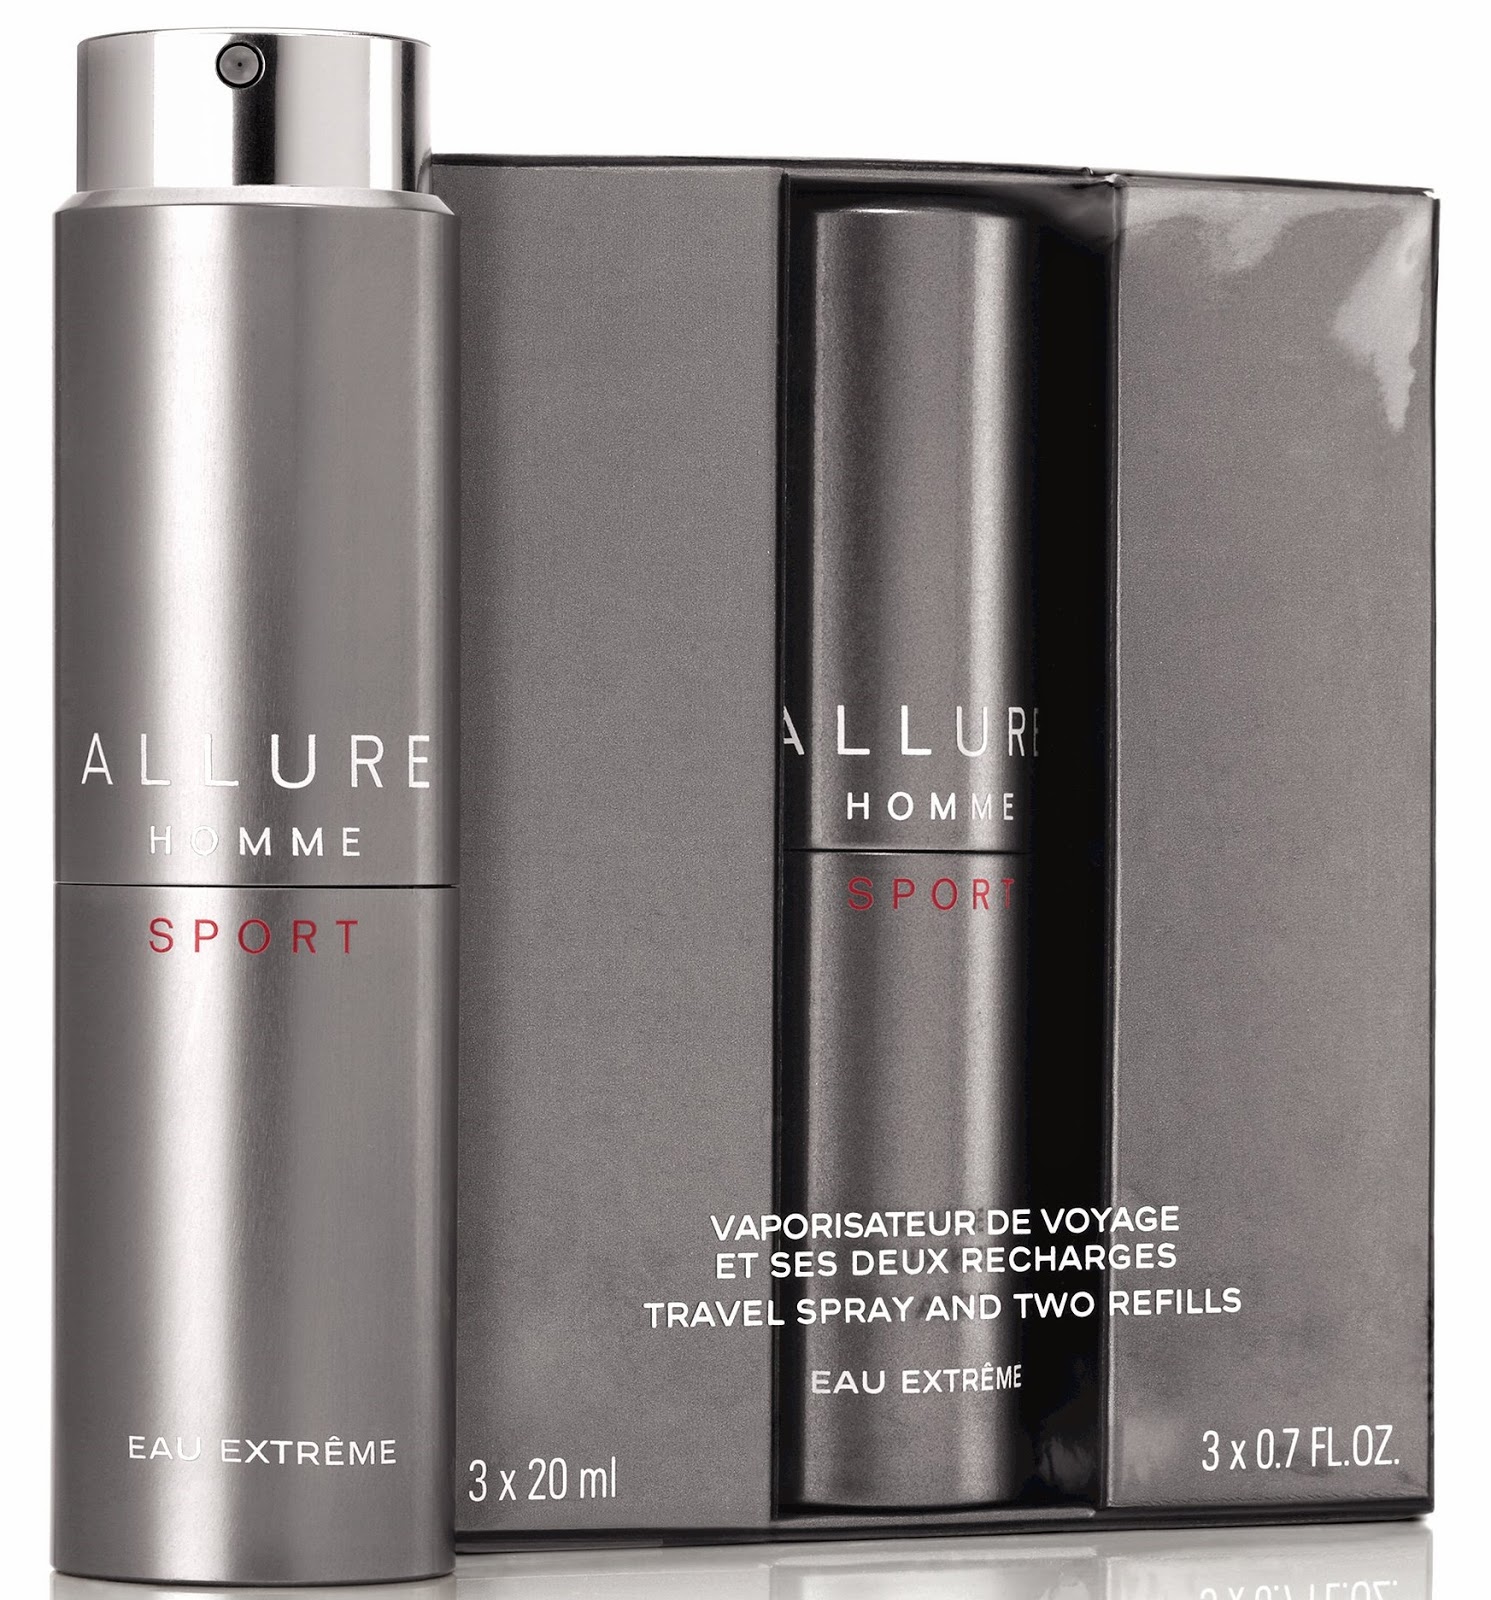 Make Up For Dolls: Chanel Allure Homme Sport Eau Extreme Travel Spray -  preview